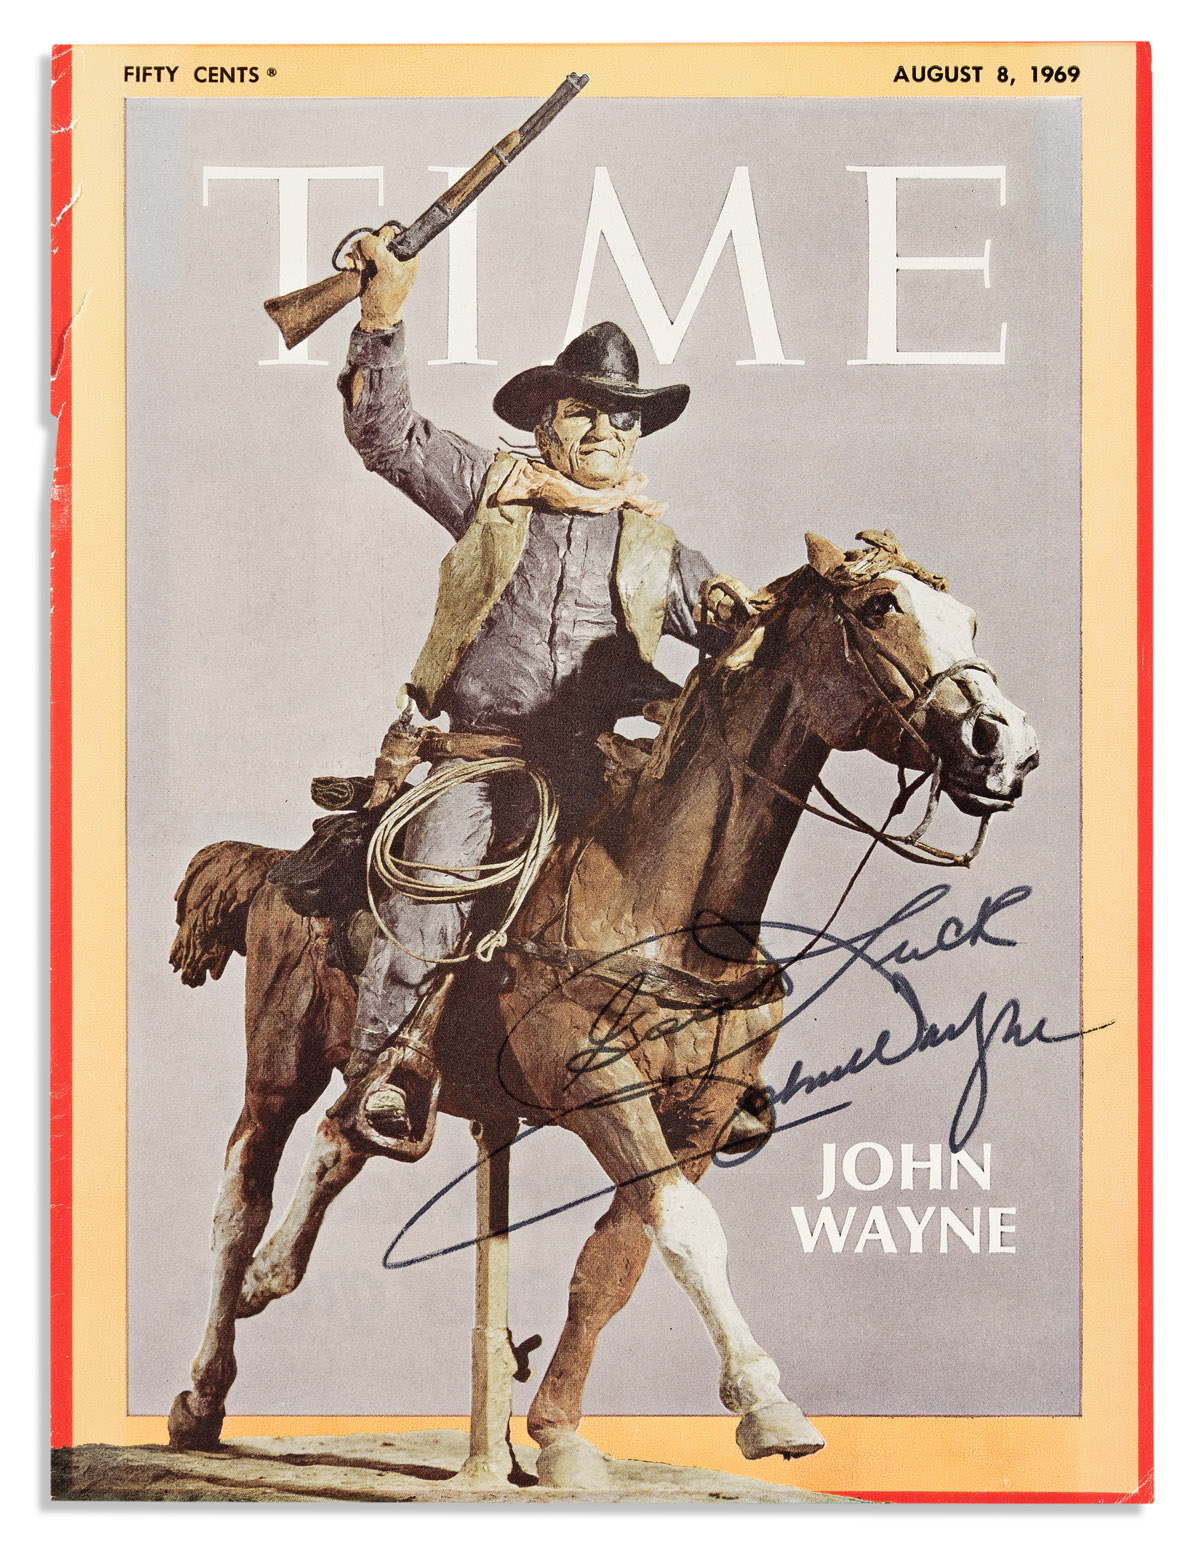 (ENTERTAINERS.) WAYNE, JOHN; AND LIZA MINNELLI. Two Time magazine covers, each Signed and Inscribed by Wayne or Minnelli,